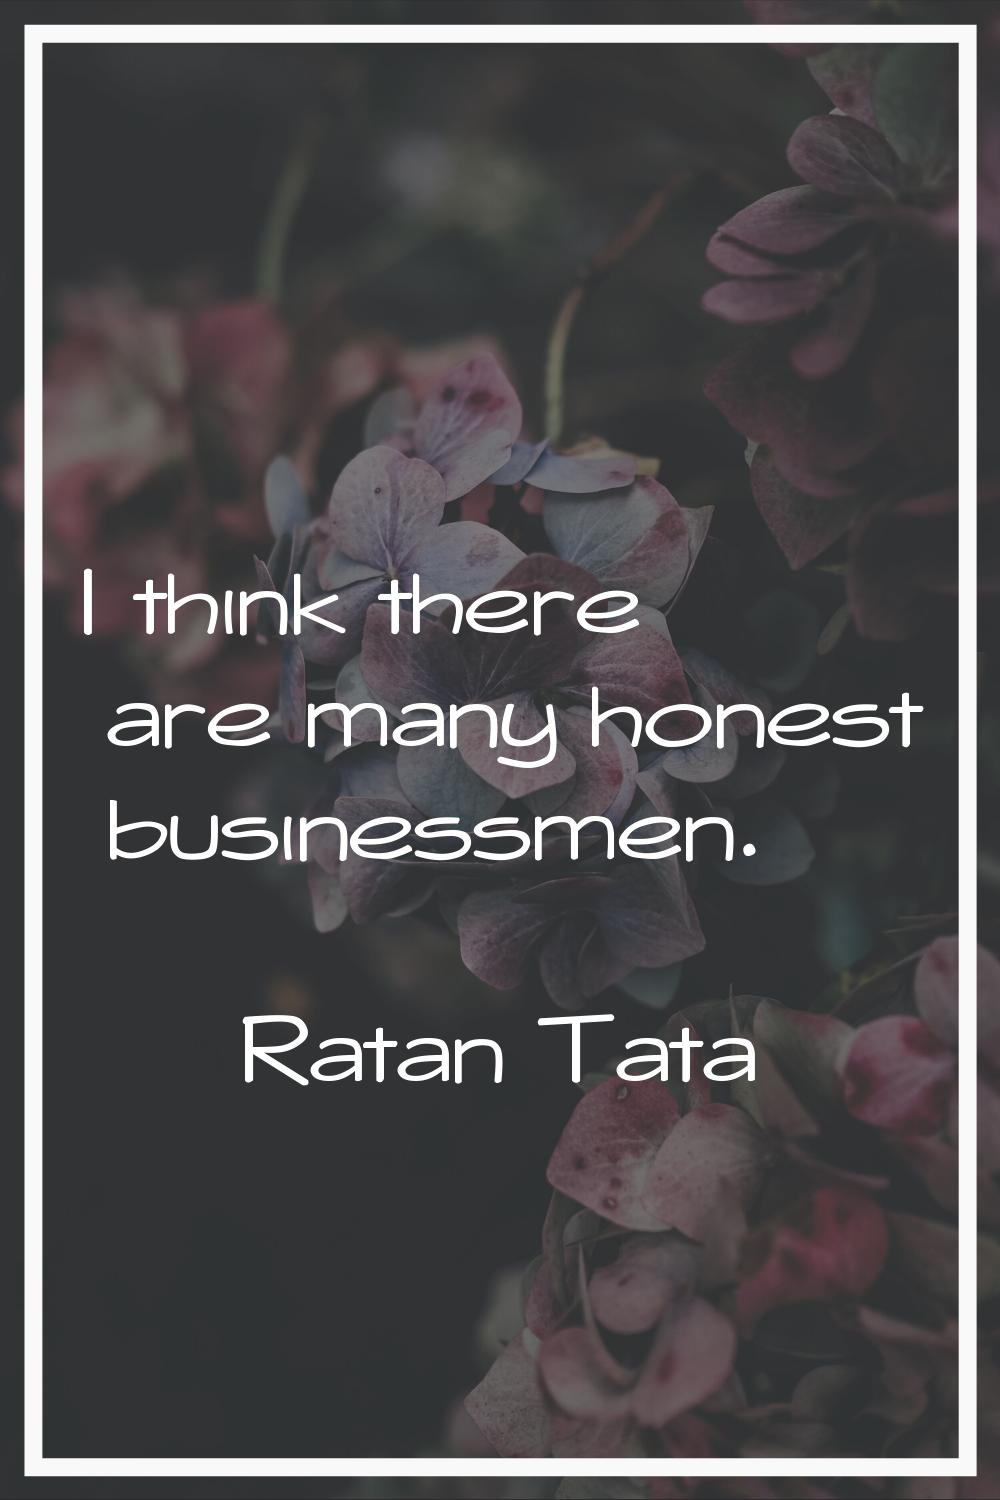 I think there are many honest businessmen.